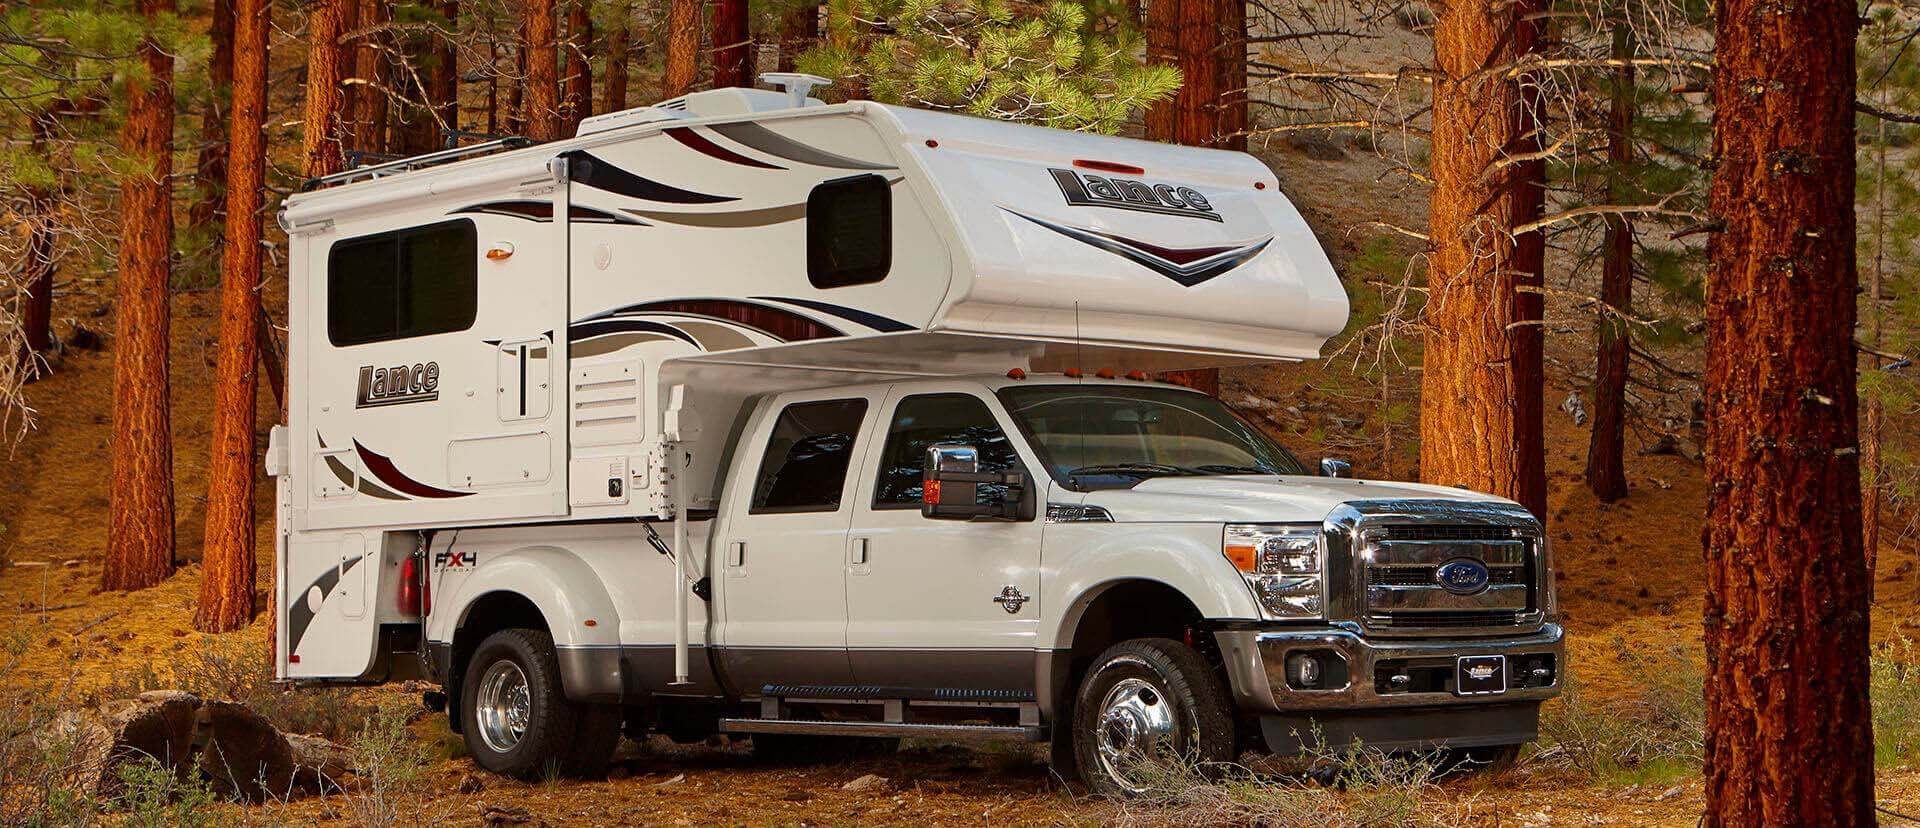 Motorhome Giant REV Group Enters Towable Market with Acquisition of Lance Camper